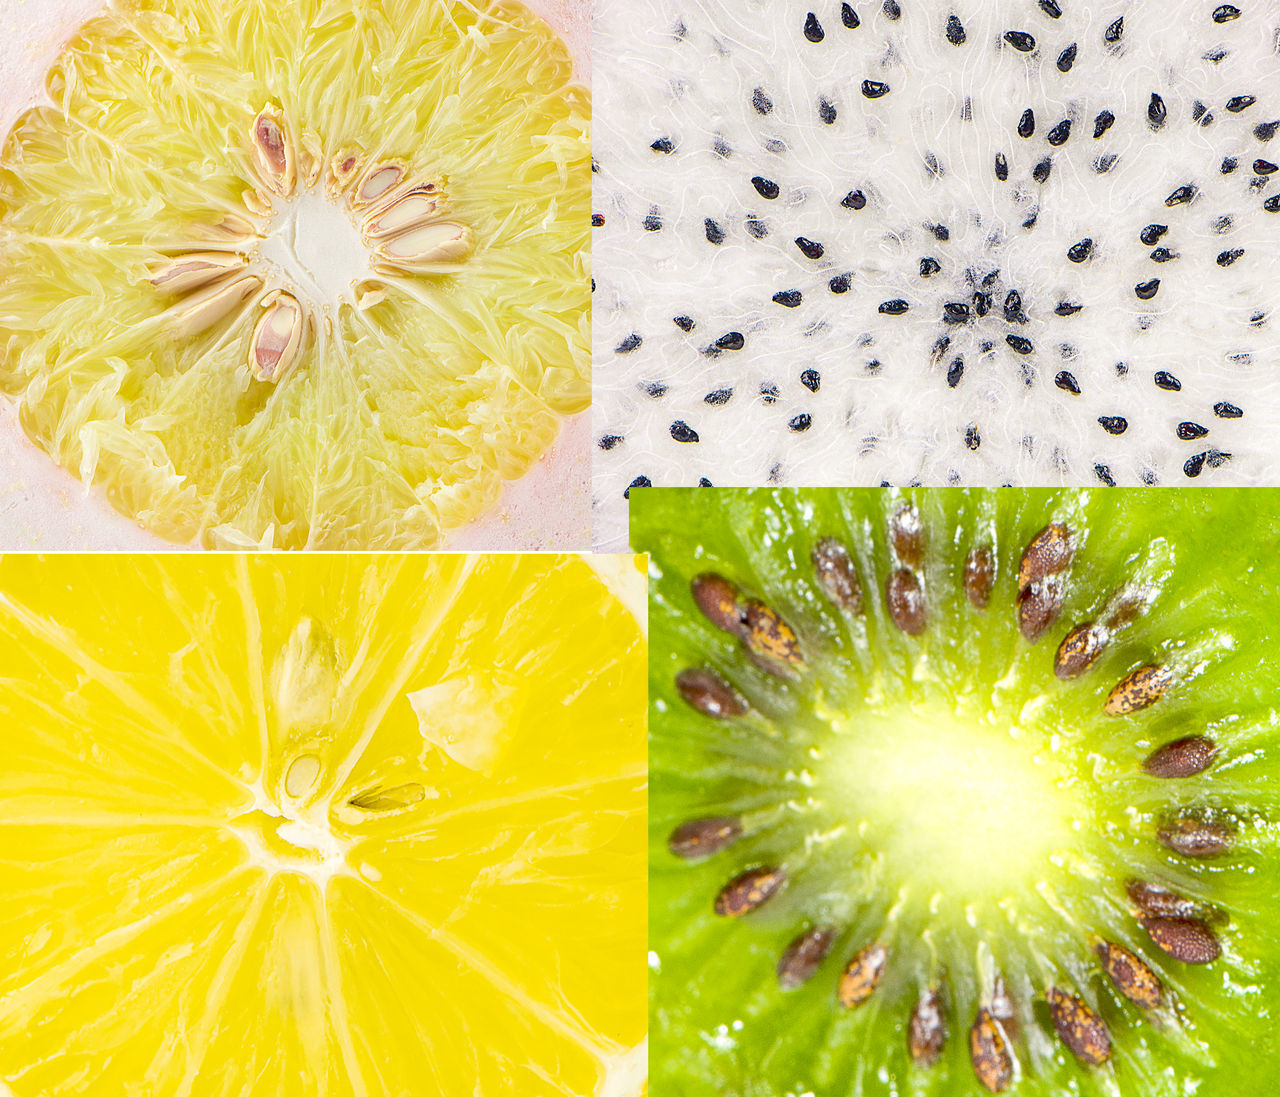 DIGITAL COMPOSITE IMAGE OF FRUIT AND YELLOW FLOWER